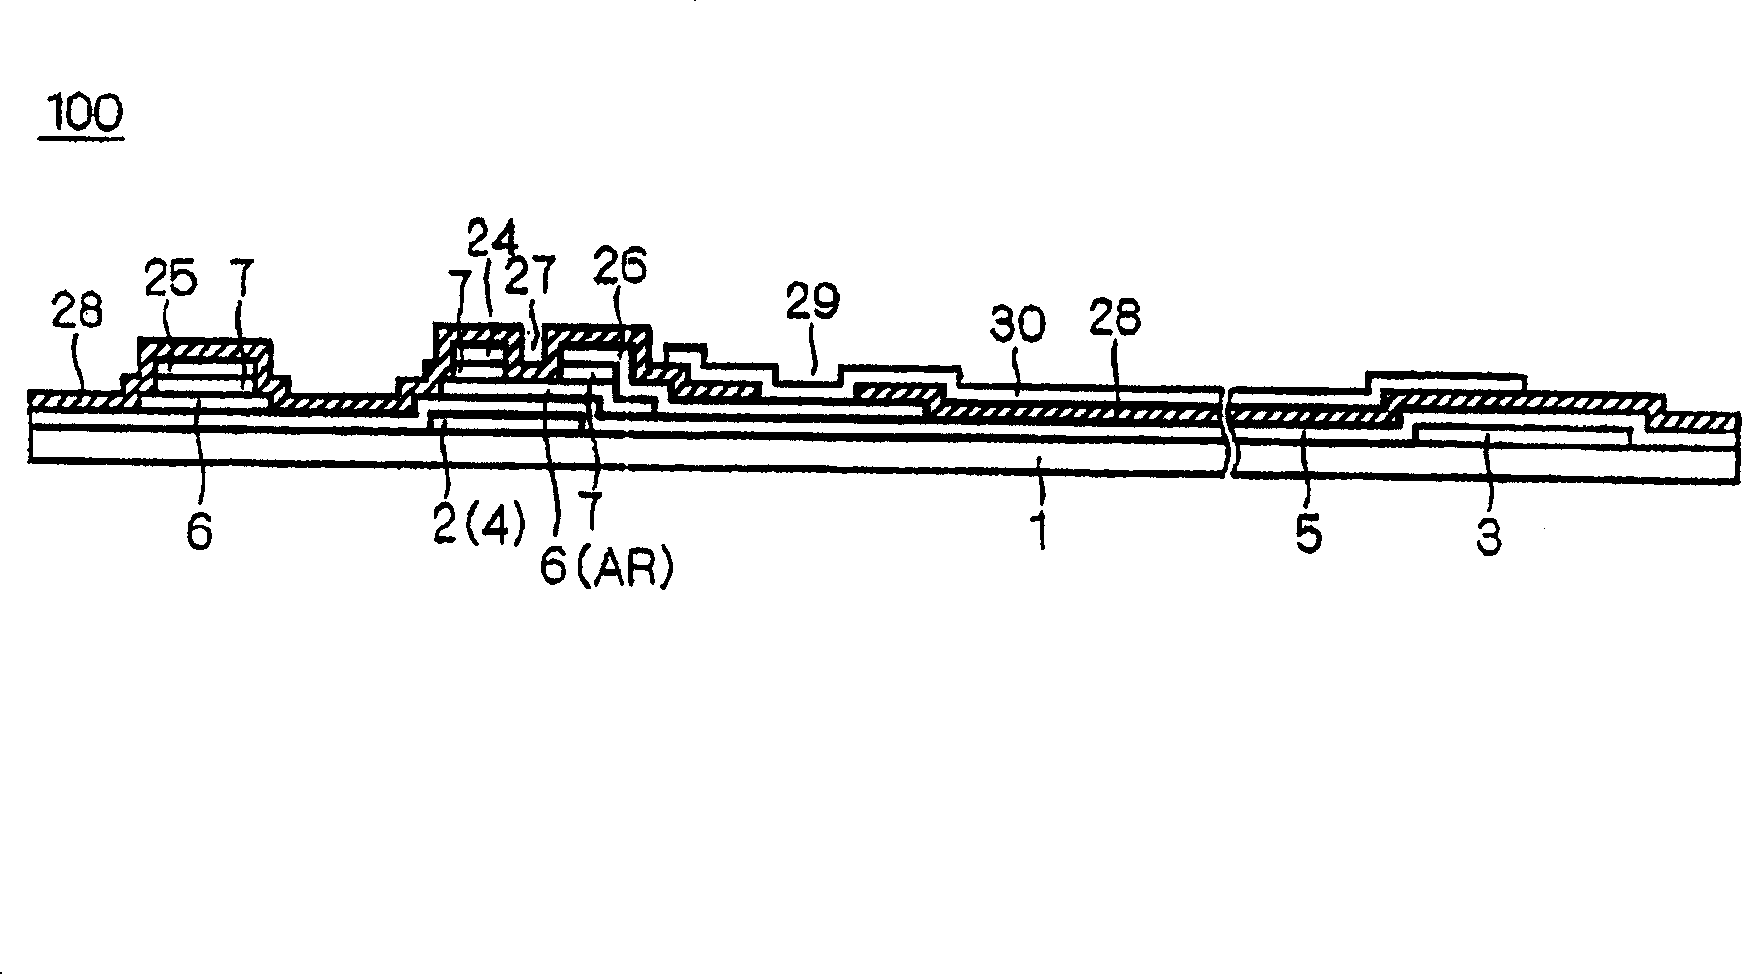 Electro-optical display device and method for manufacturing same